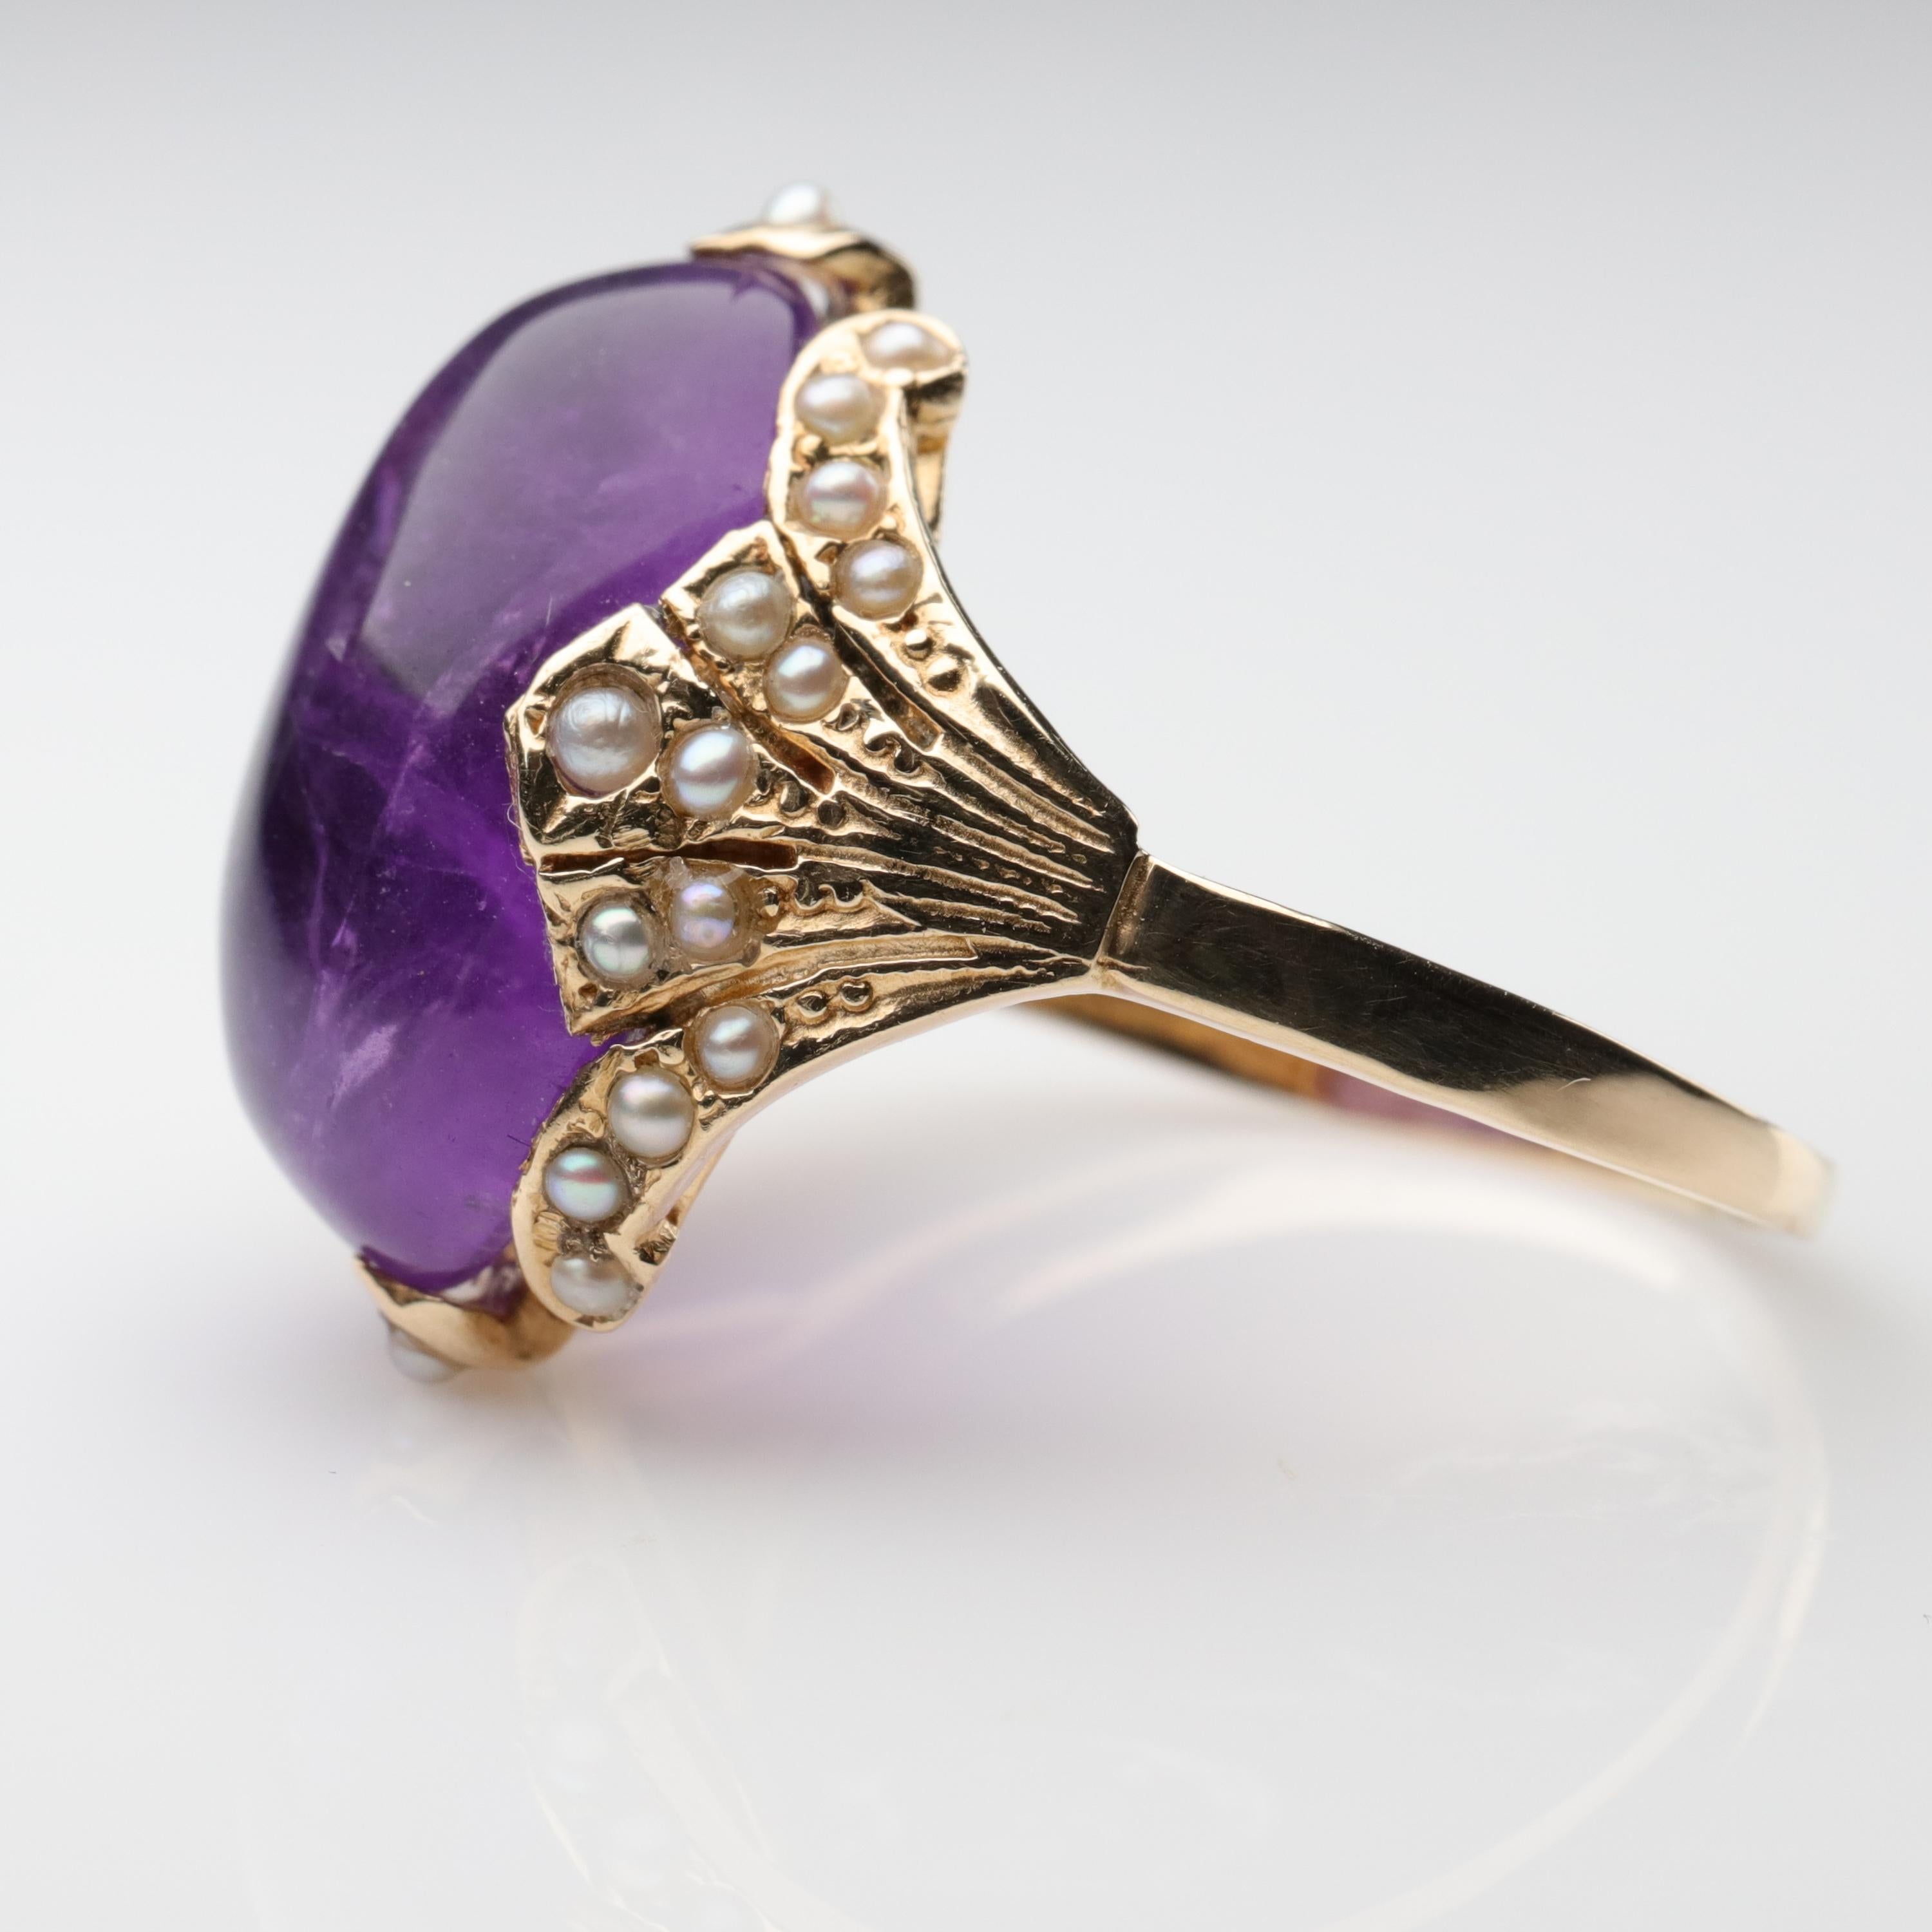 Women's or Men's Victorian Amethyst Ring for Divination, Scrying, Soothsaying or Just Fashion